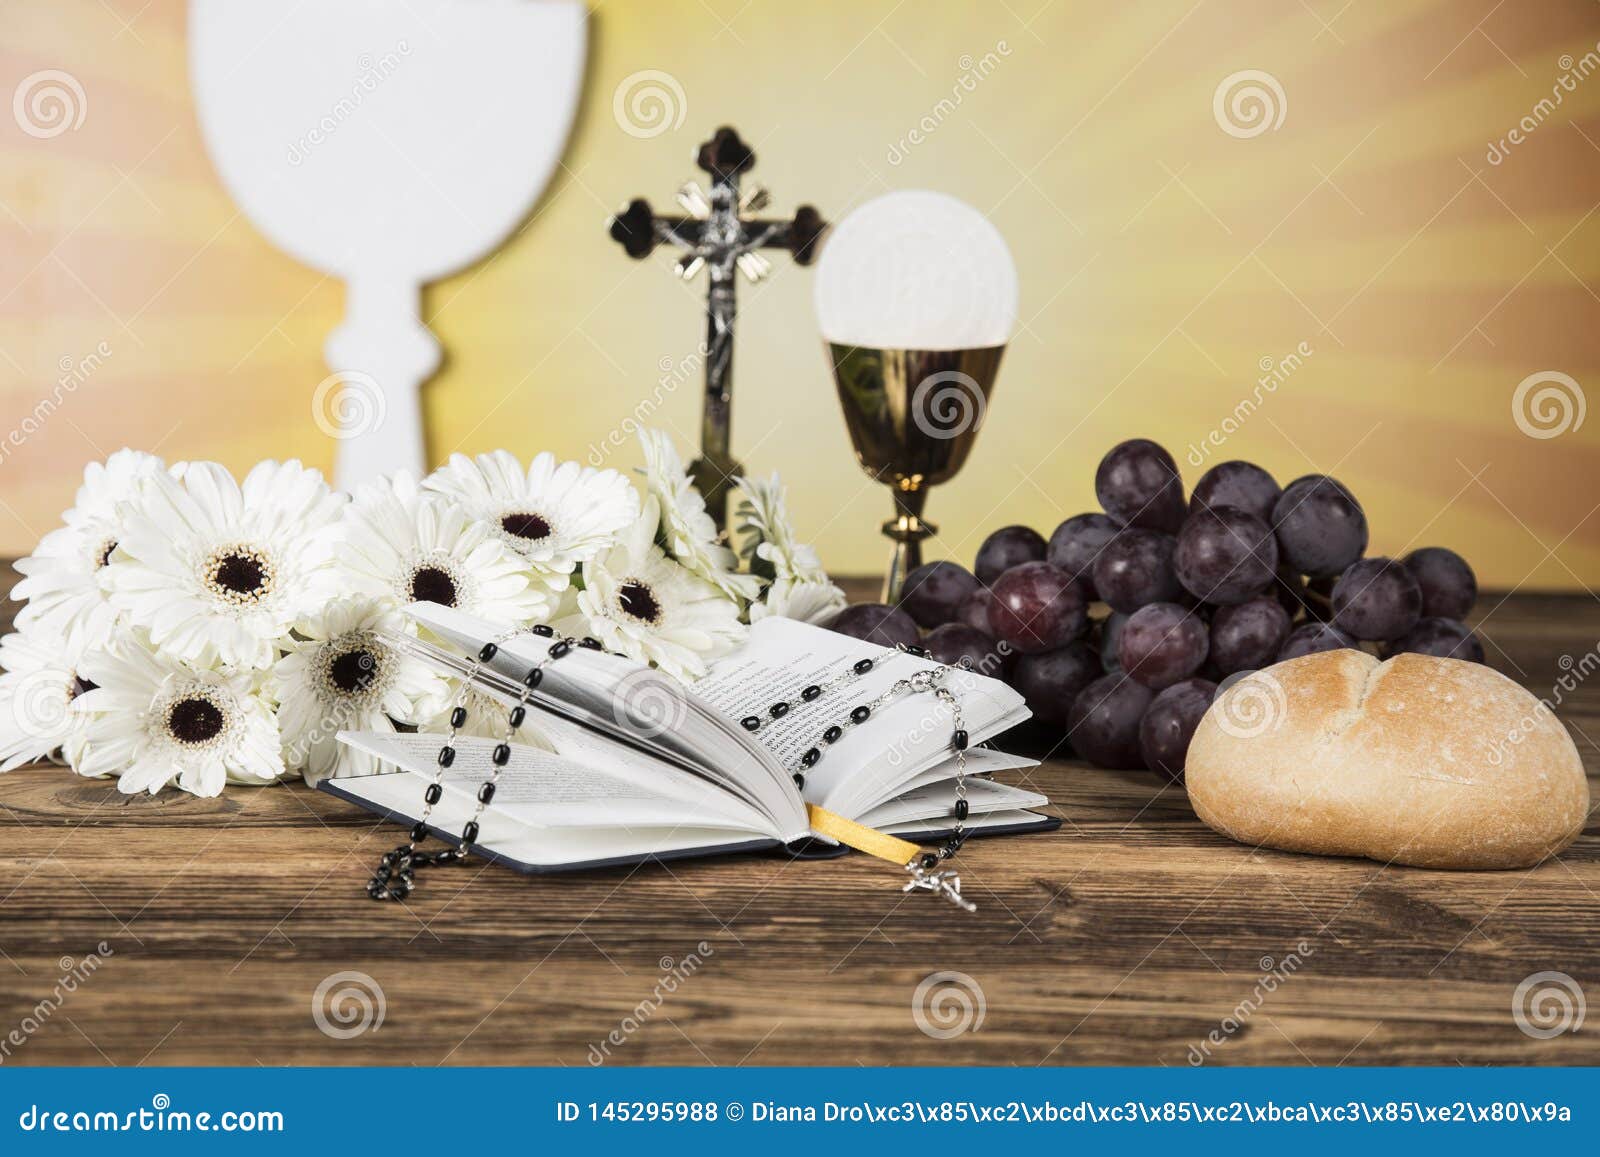 The Background of the First Holy Communion Stock Photo - Image of church,  communion: 145295988